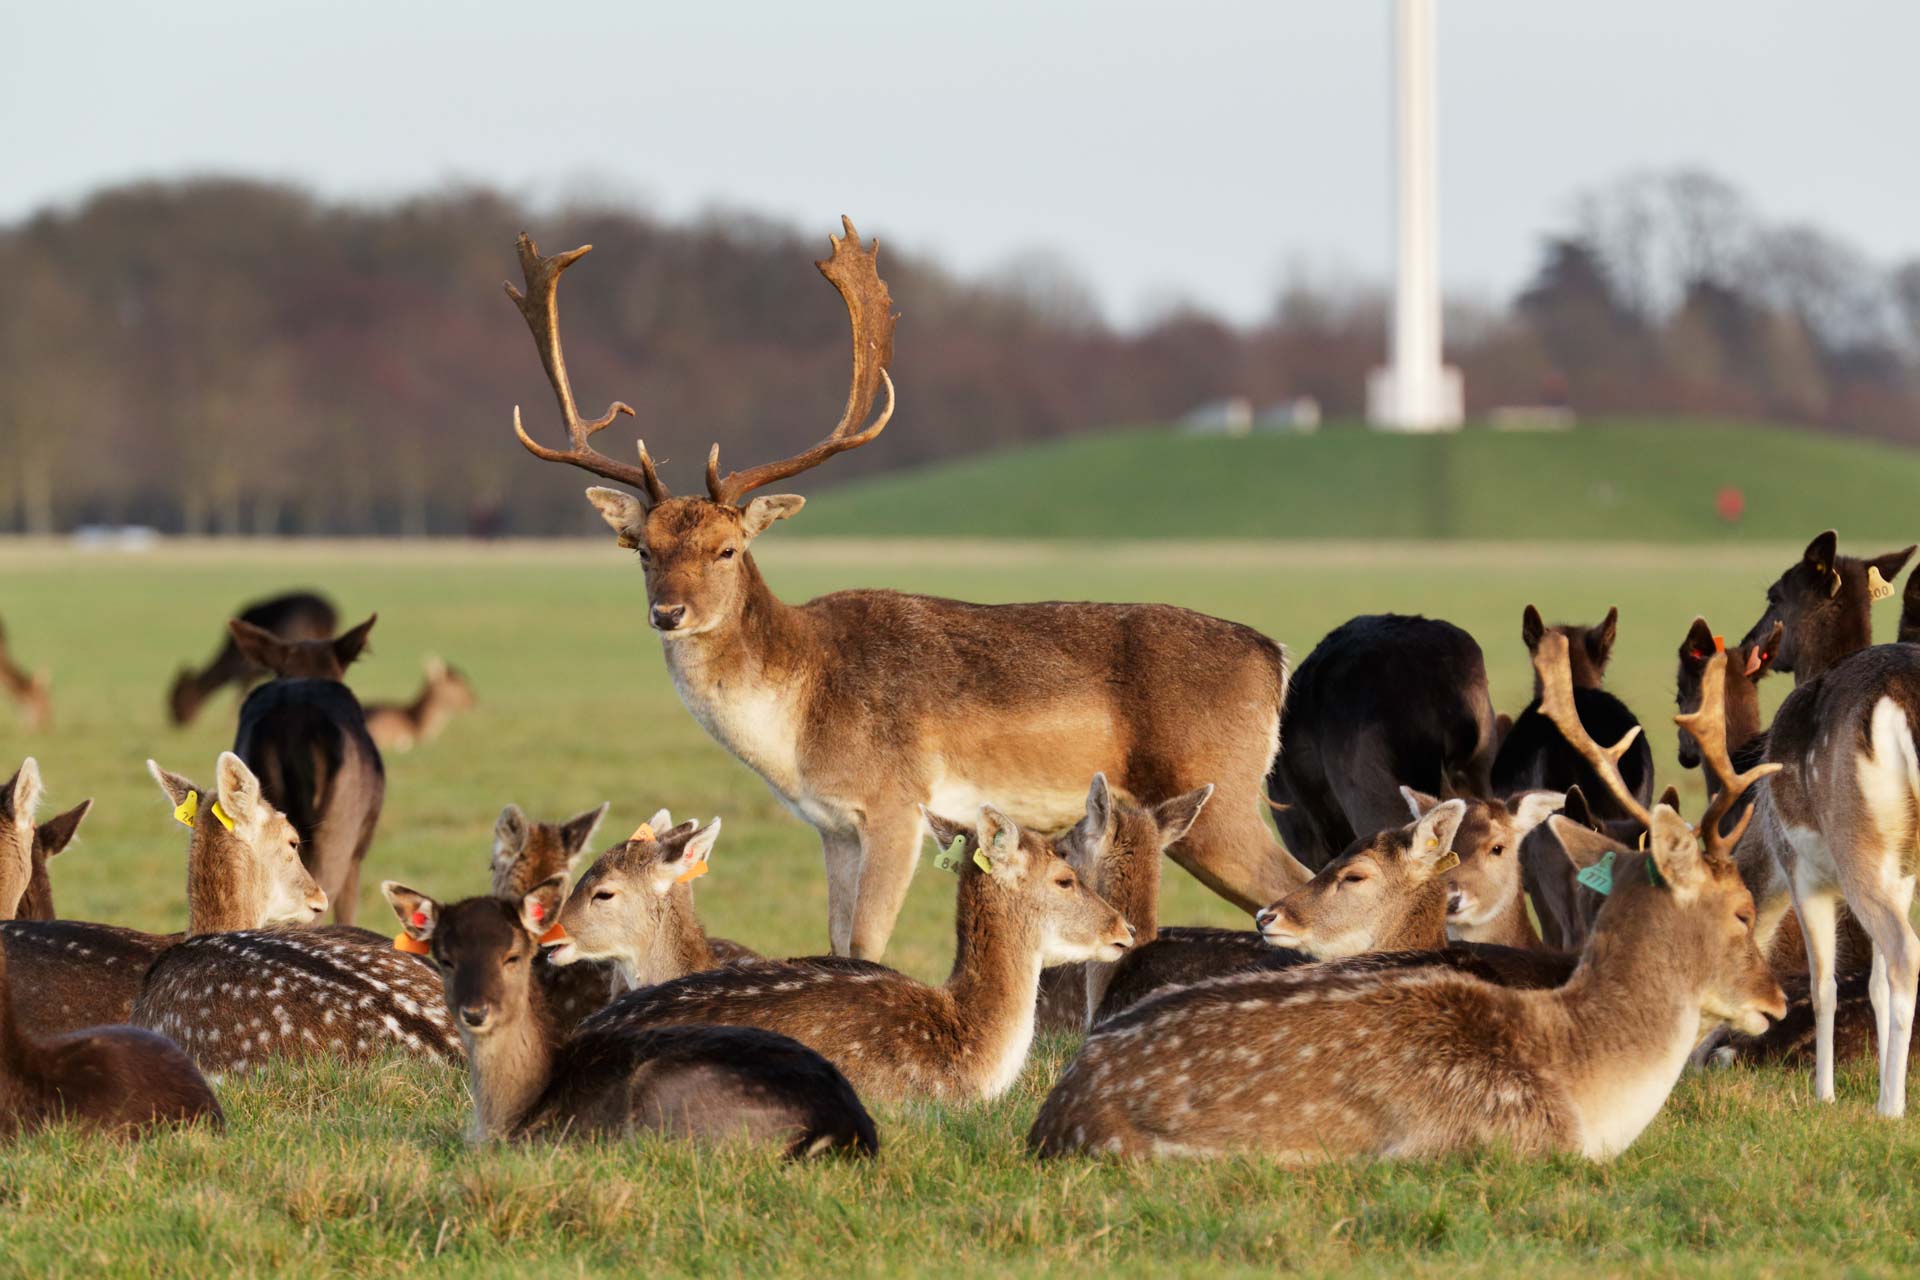 Stag in Phoenix Park Dublin with monument in background